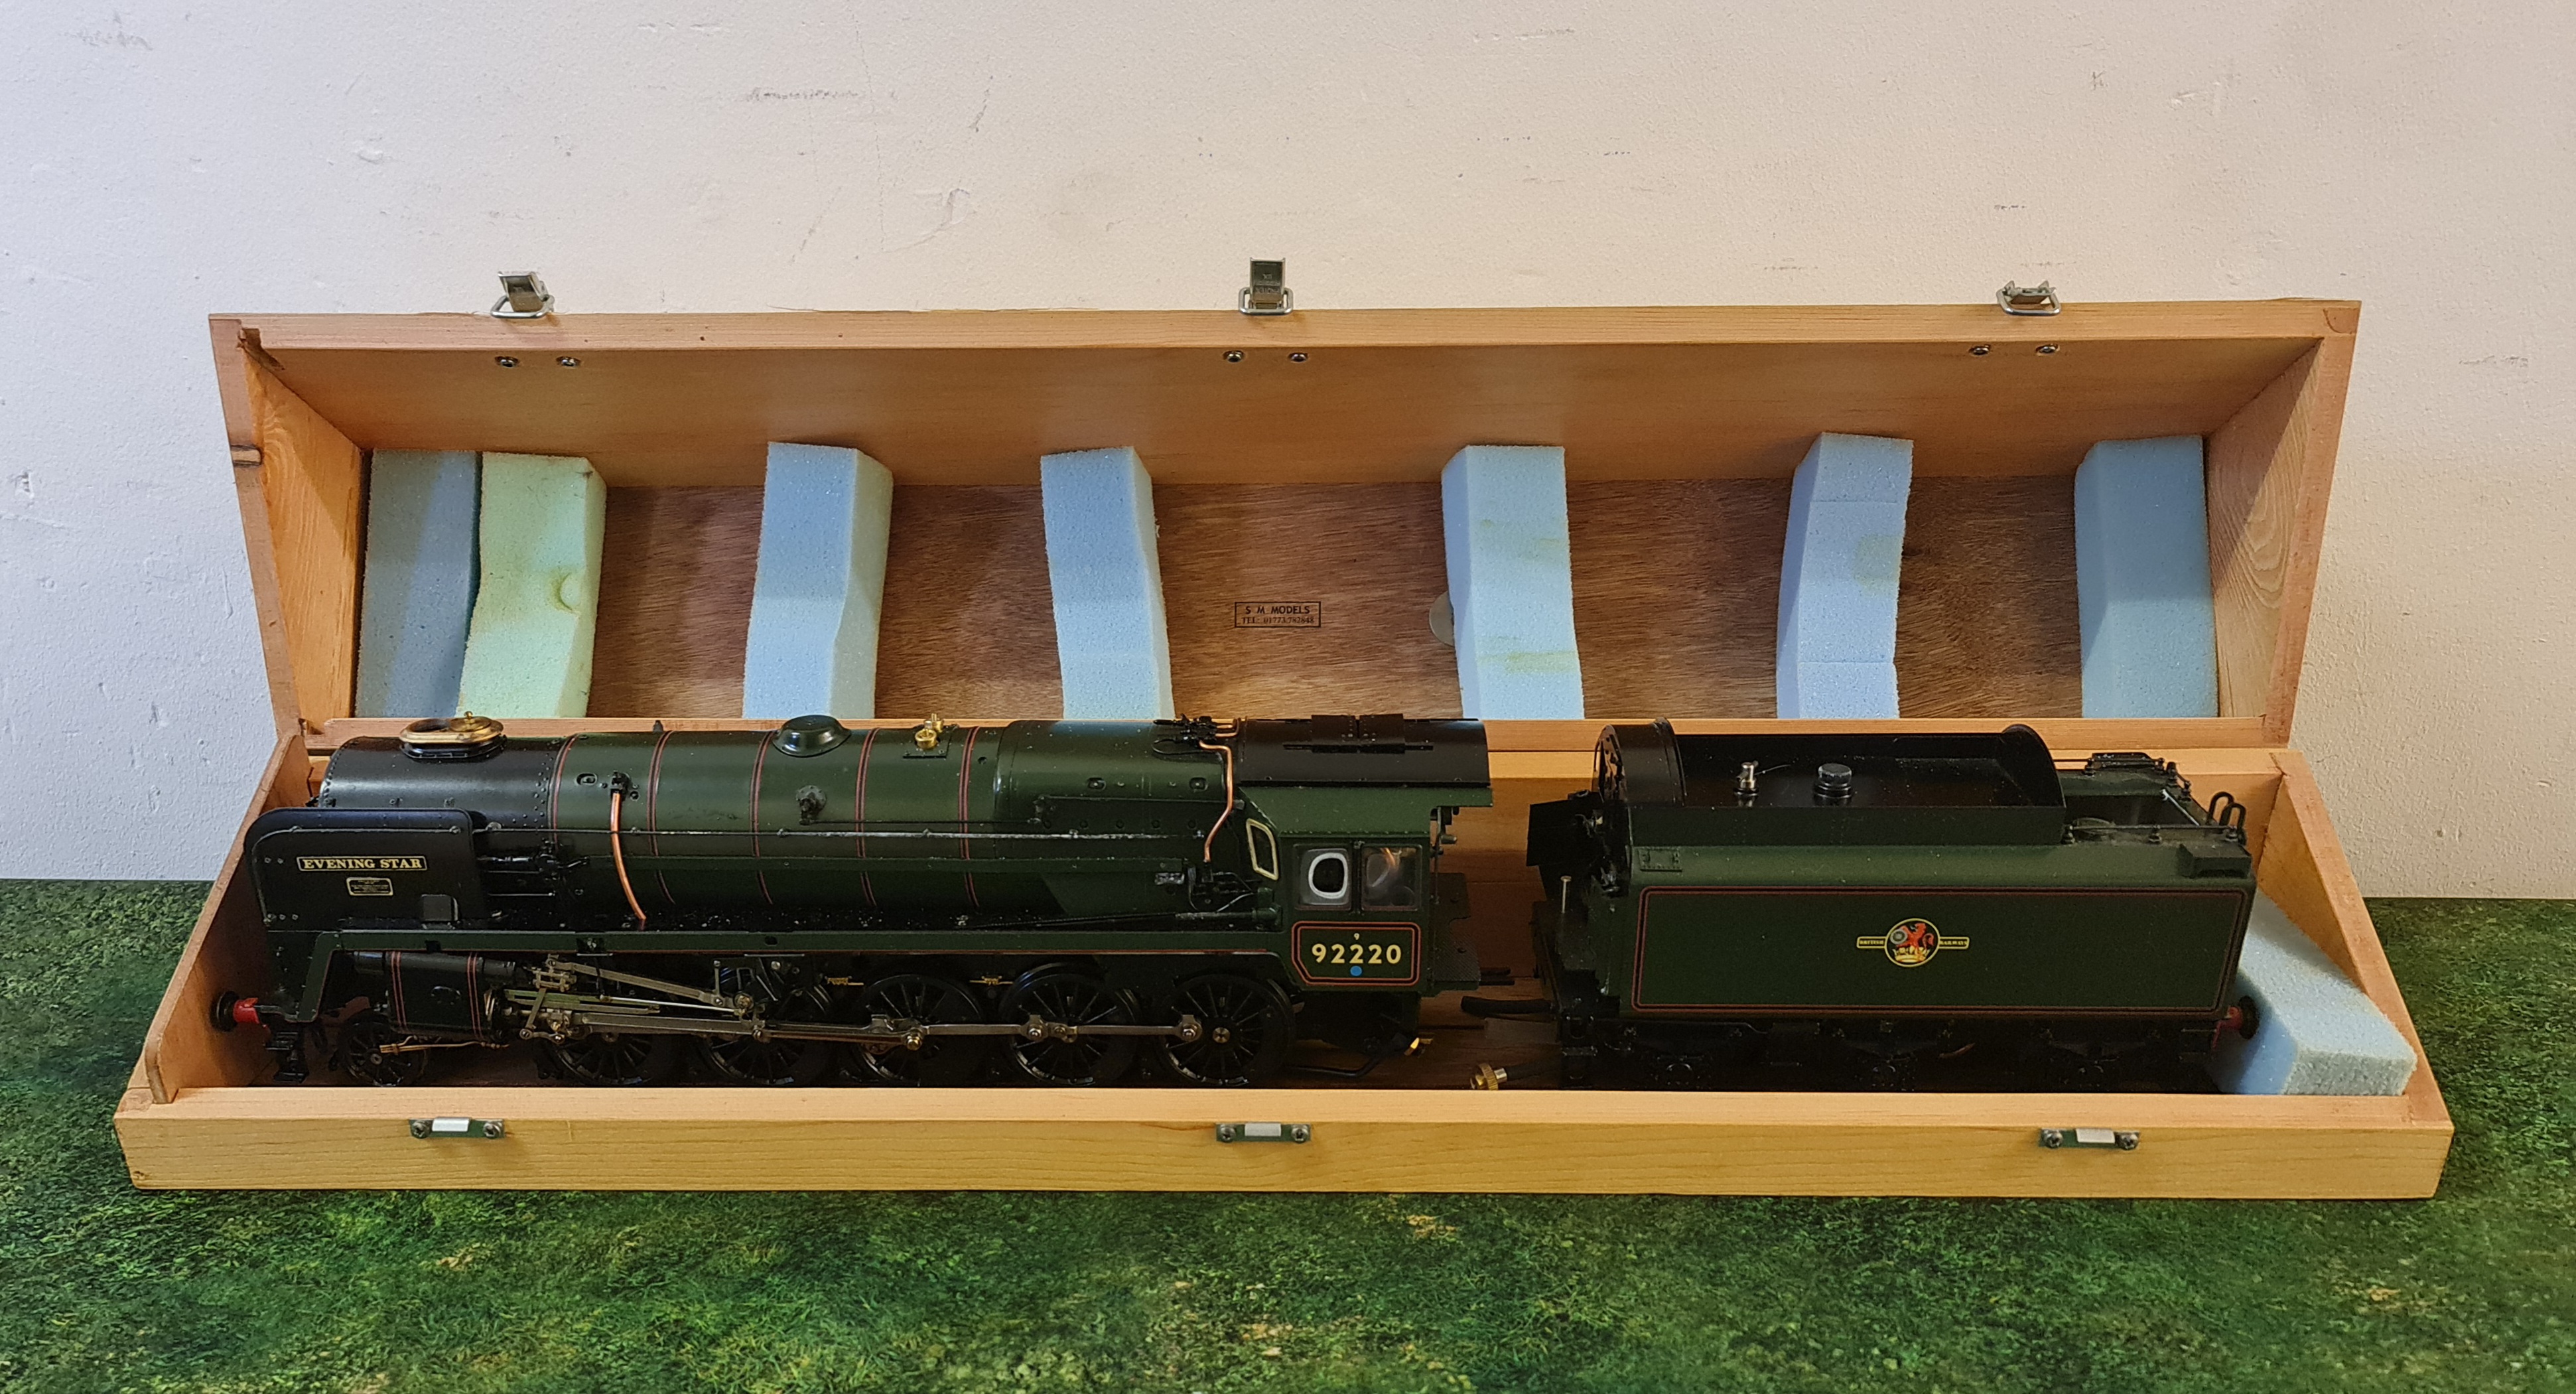 An Aster Hobby live steam Evening Star 92220 gauge 1 model train and tender with wooden travel box